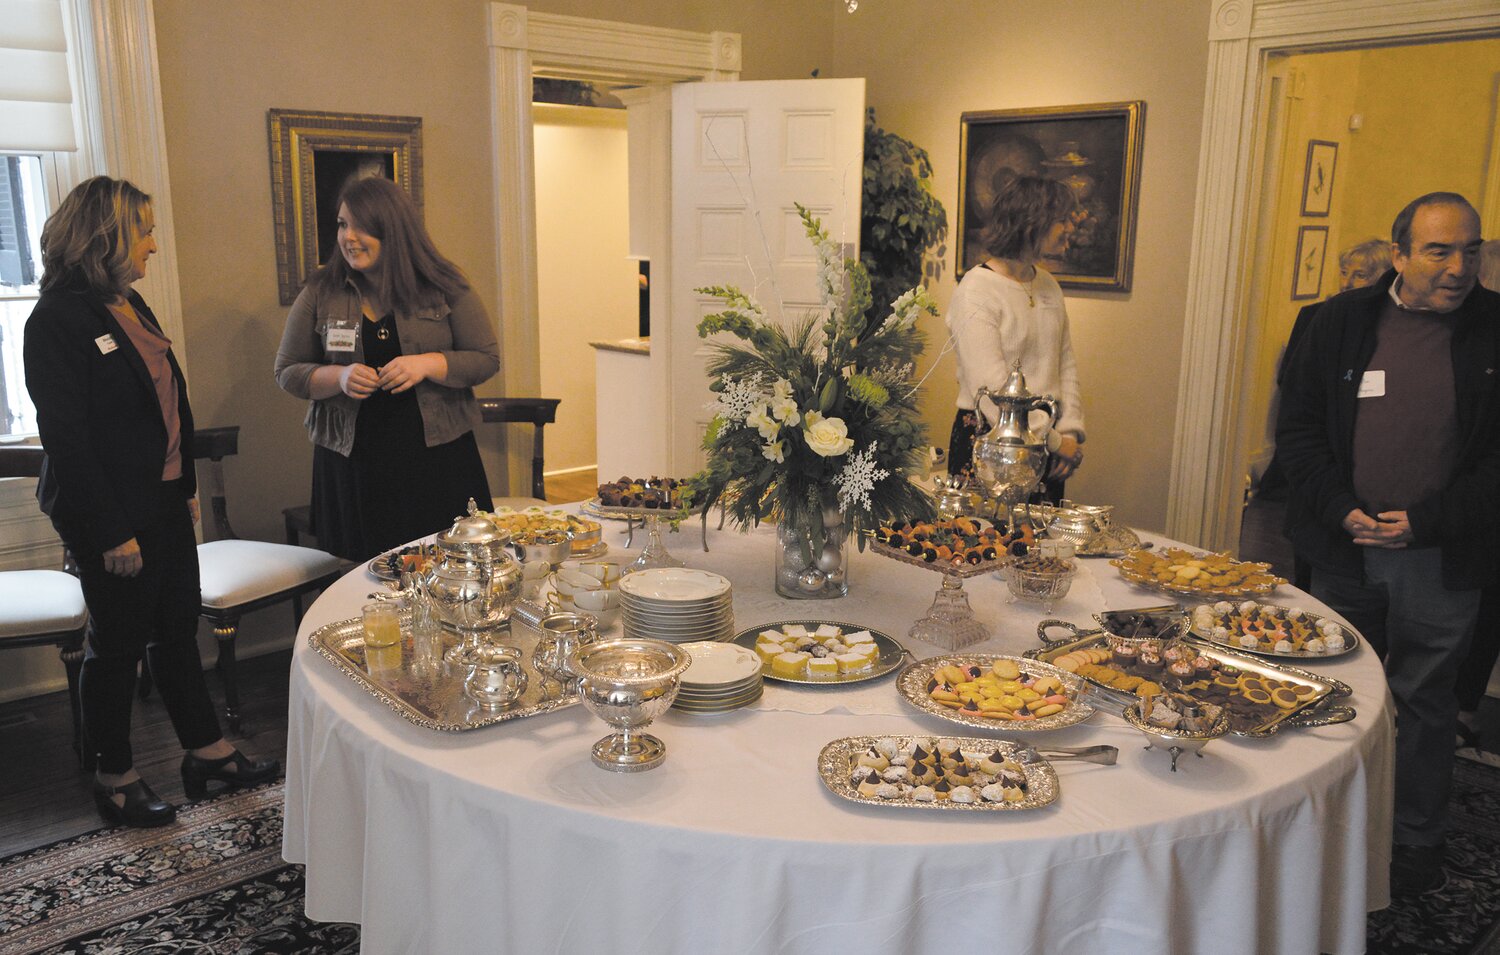 The 17th annual Holiday Tea and Fashion Show was held Friday at the Elston Homestead. The event is a fundraiser for the Gen. Lew Wallace Study & Museum. Event goers enjoyed tea and coffee, sandwiches and desserts, a fashion show, live entertainment by the Wabash Glee Club and door prizes.